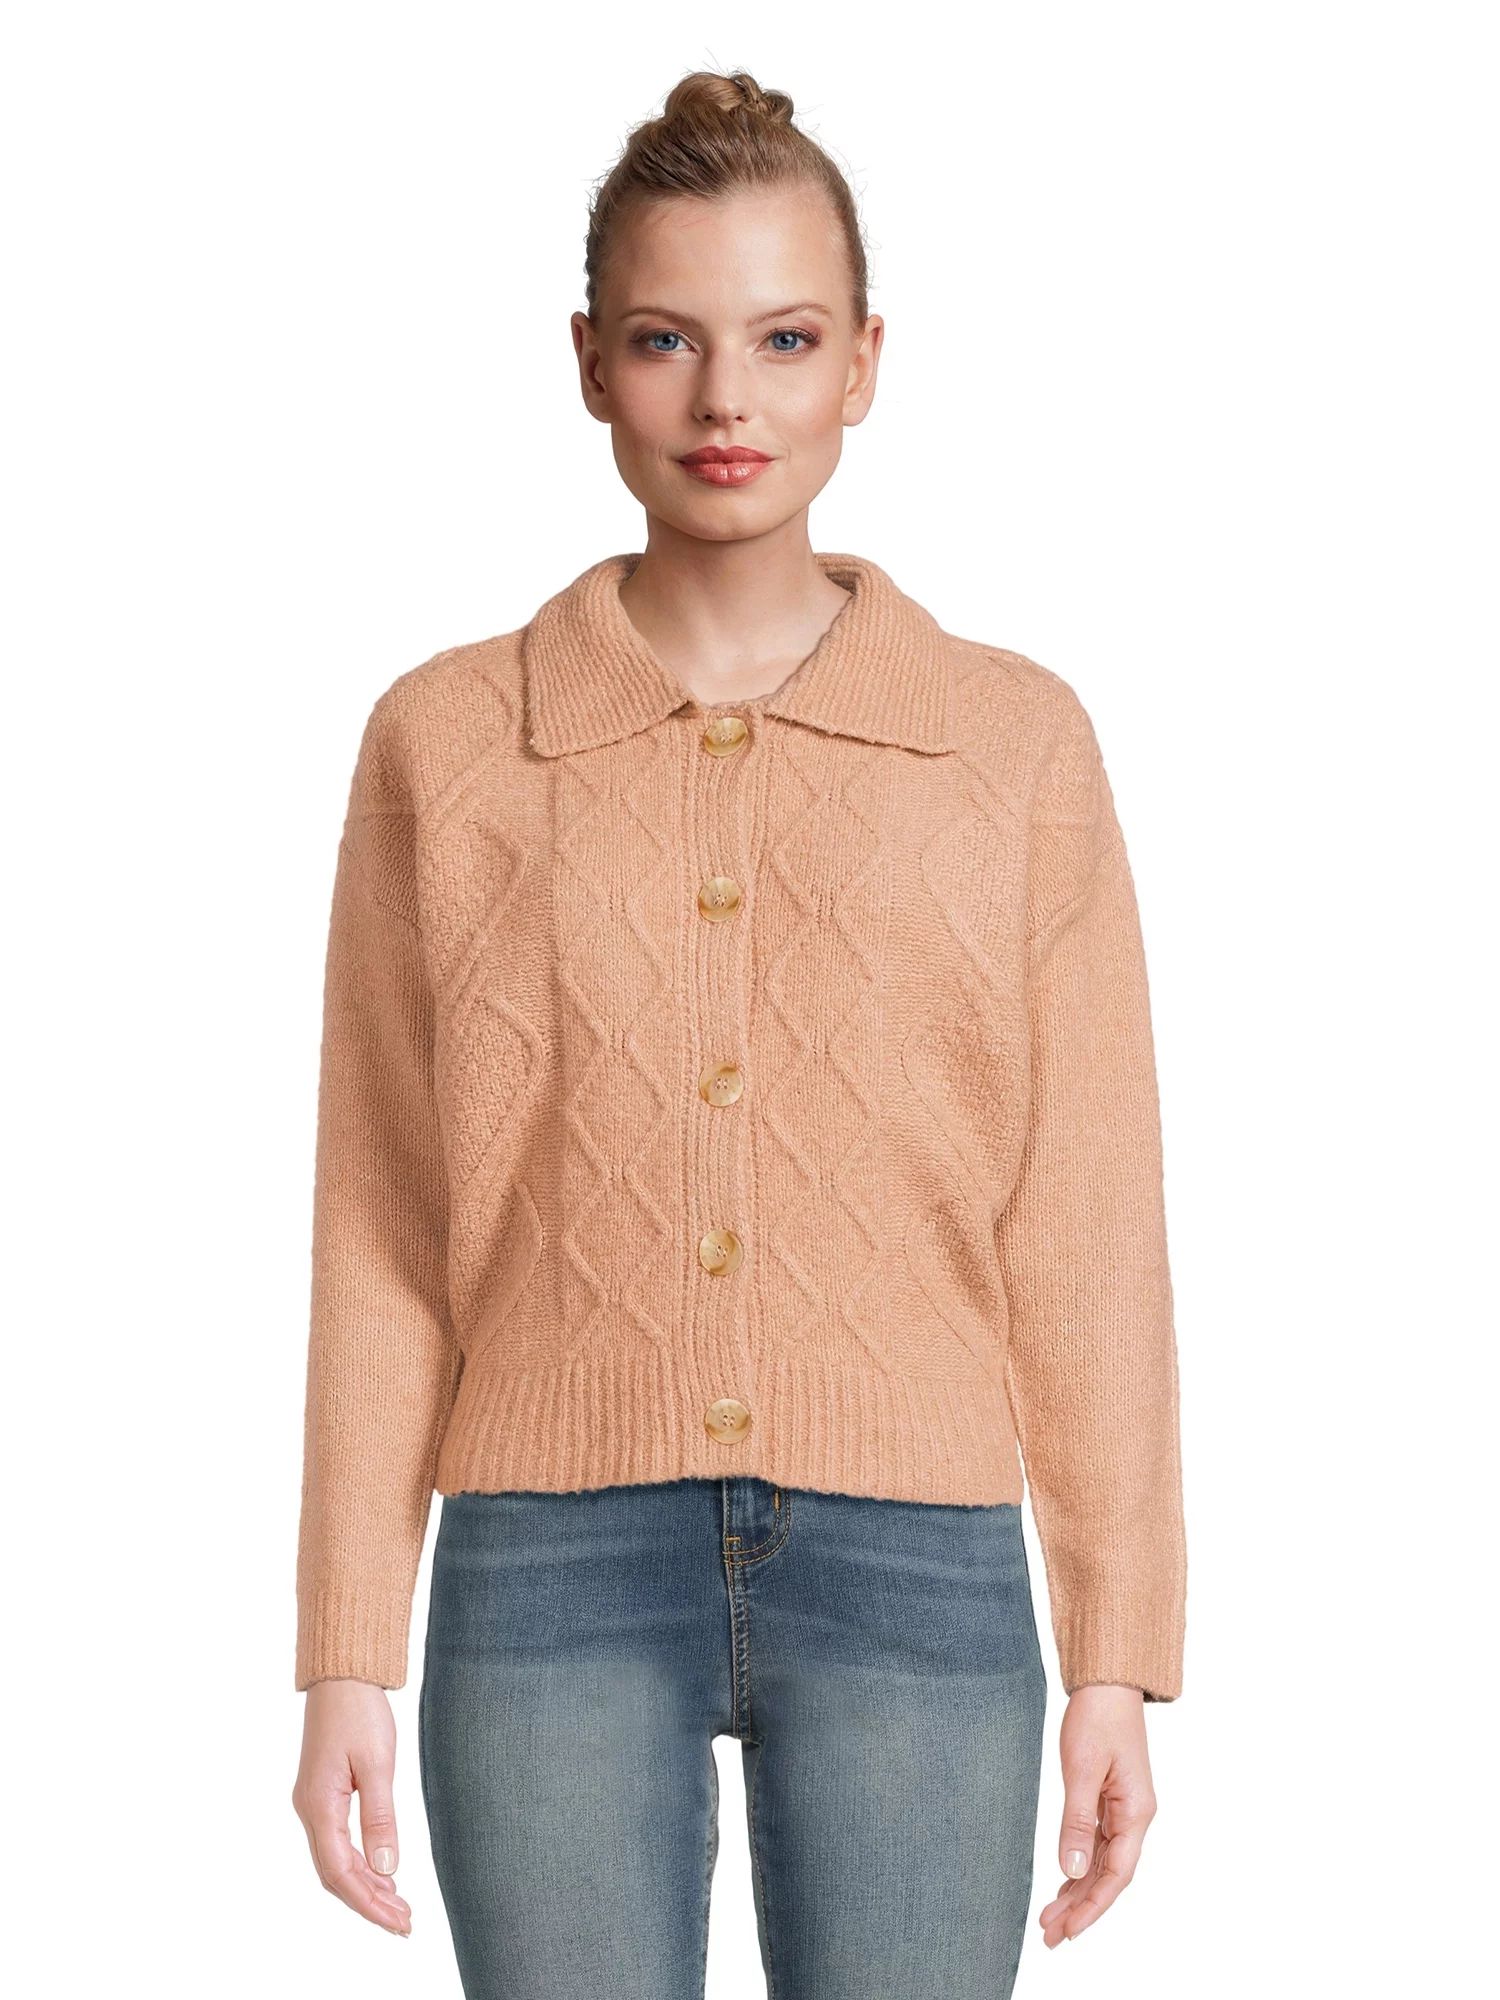 Pink Rose Juniors Button Front Cardigan Sweater with Long Sleeves, Sizes S-L | Walmart (US)